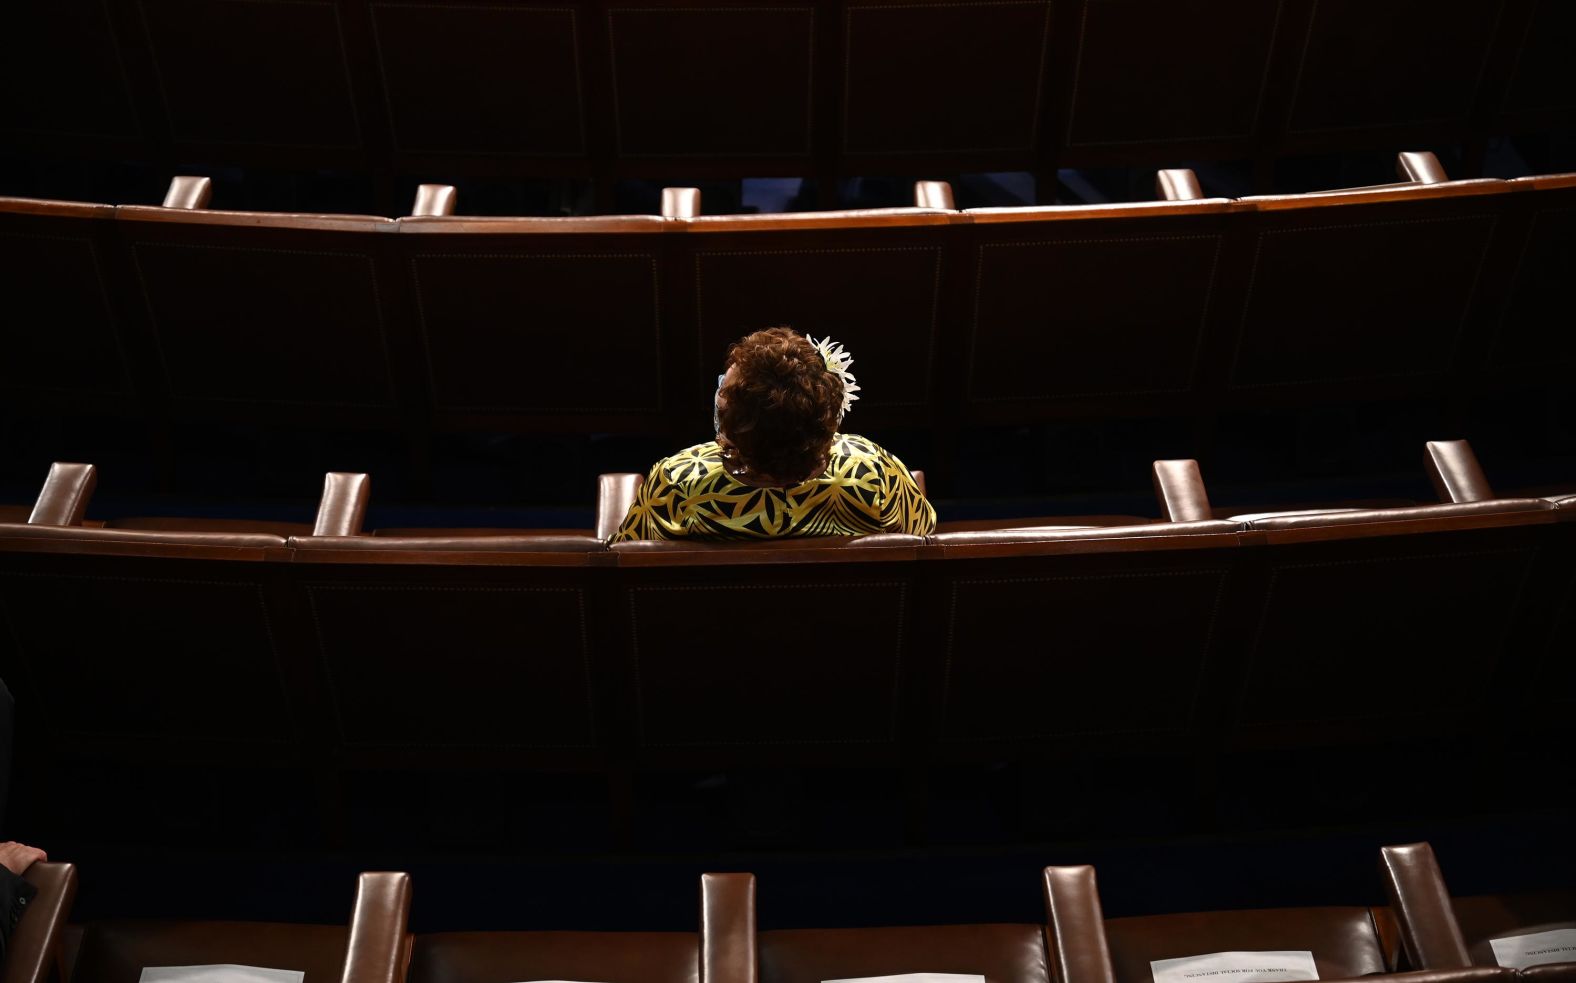 Between each of the assigned seats were four empty seats, designed to encourage social distancing in the chamber.